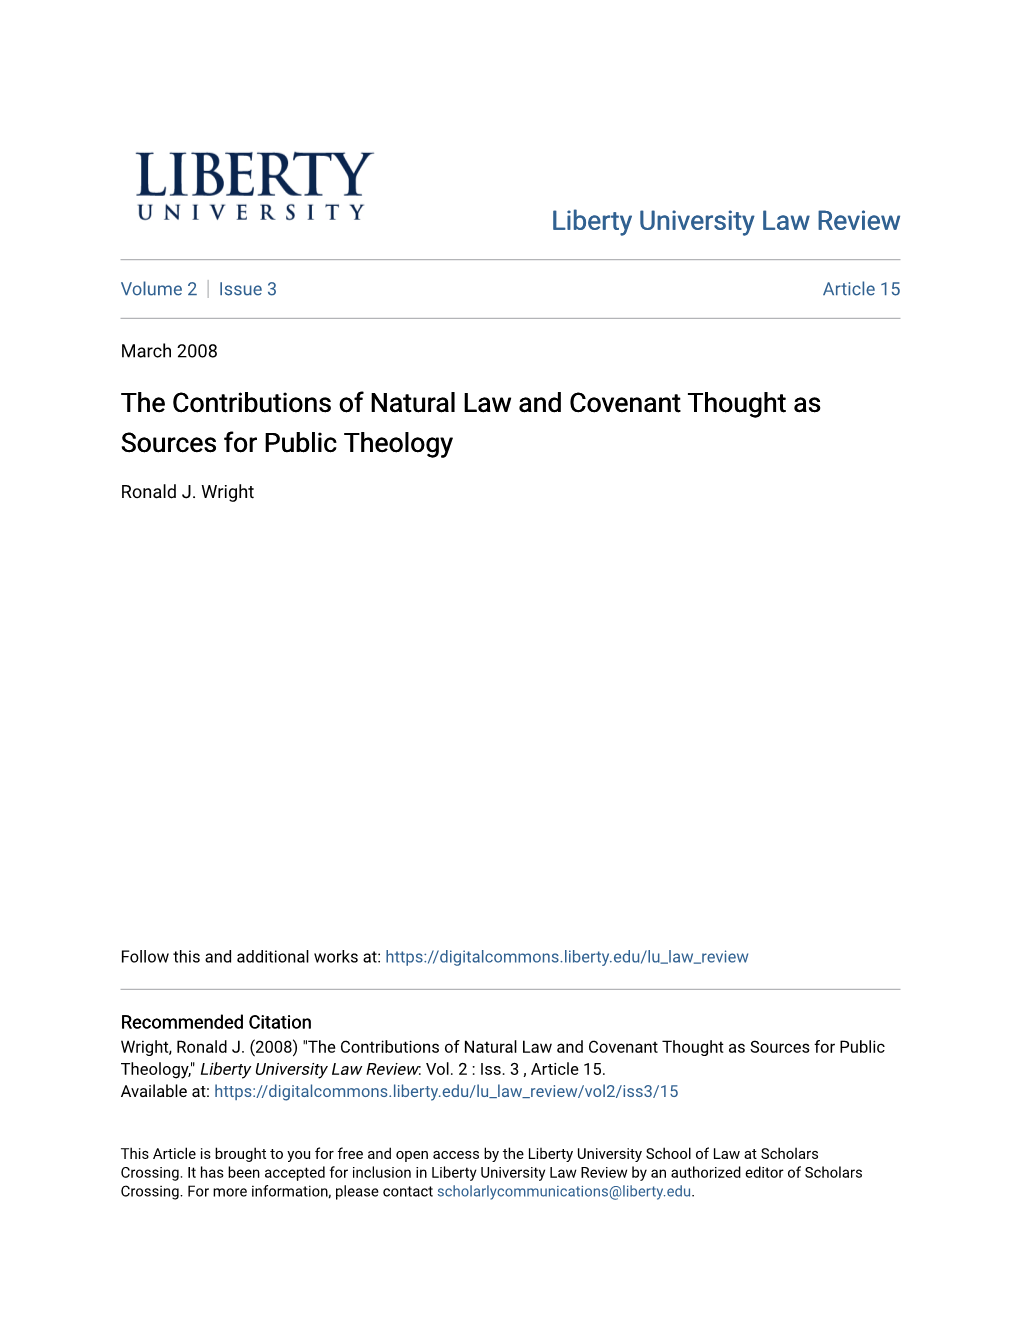 The Contributions of Natural Law and Covenant Thought As Sources for Public Theology